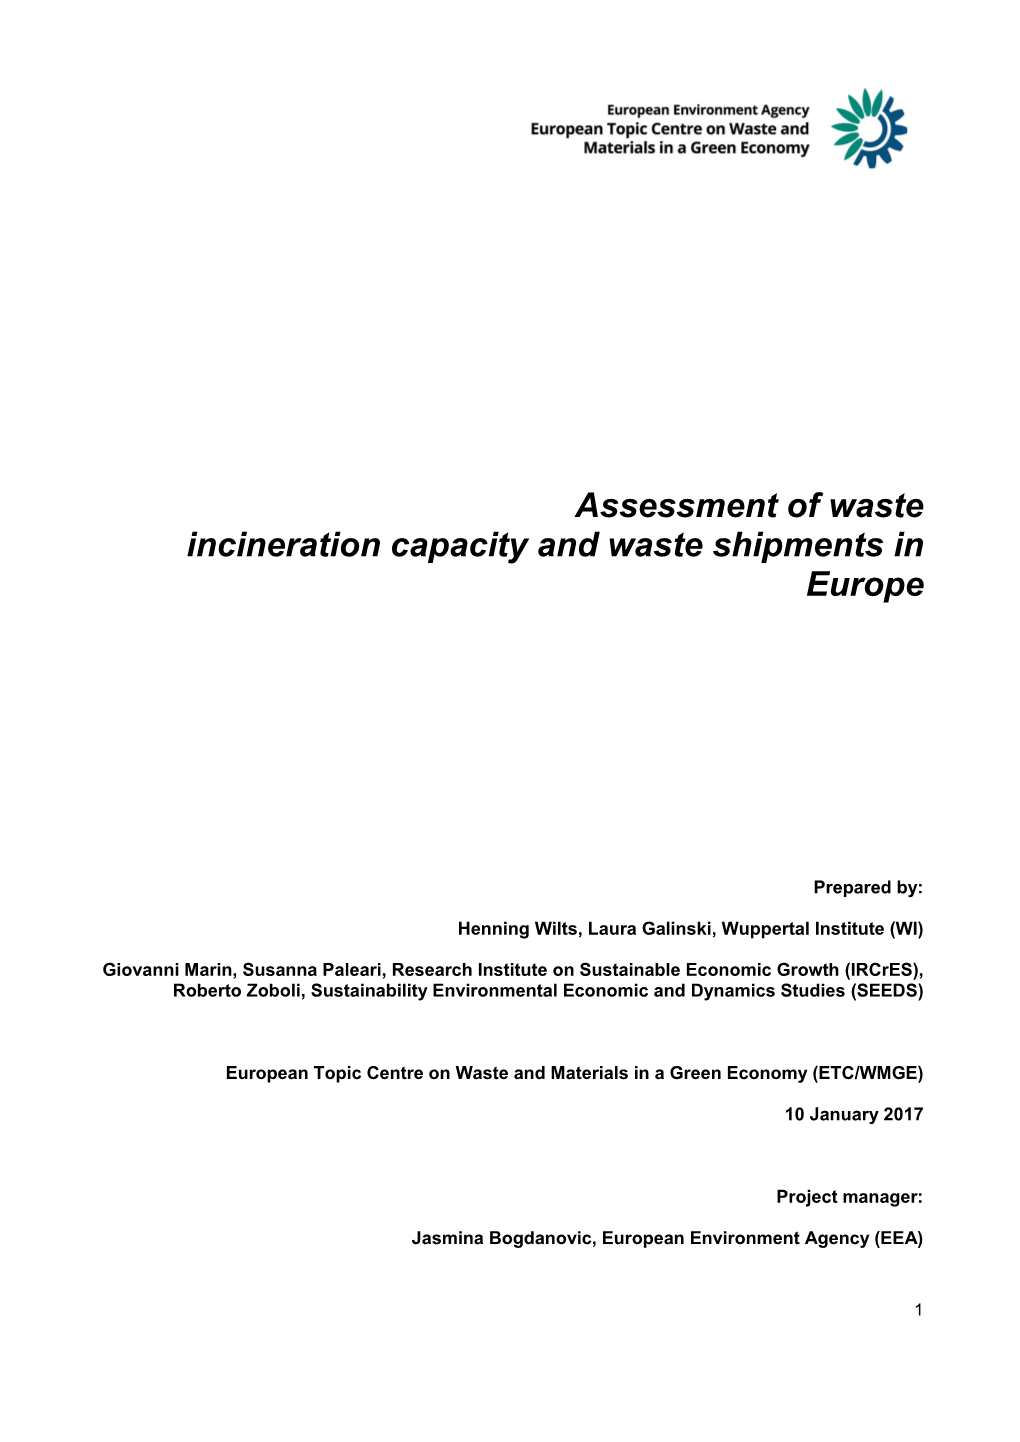 Assessment of Waste Incineration Capacity and Waste Shipments in Europe